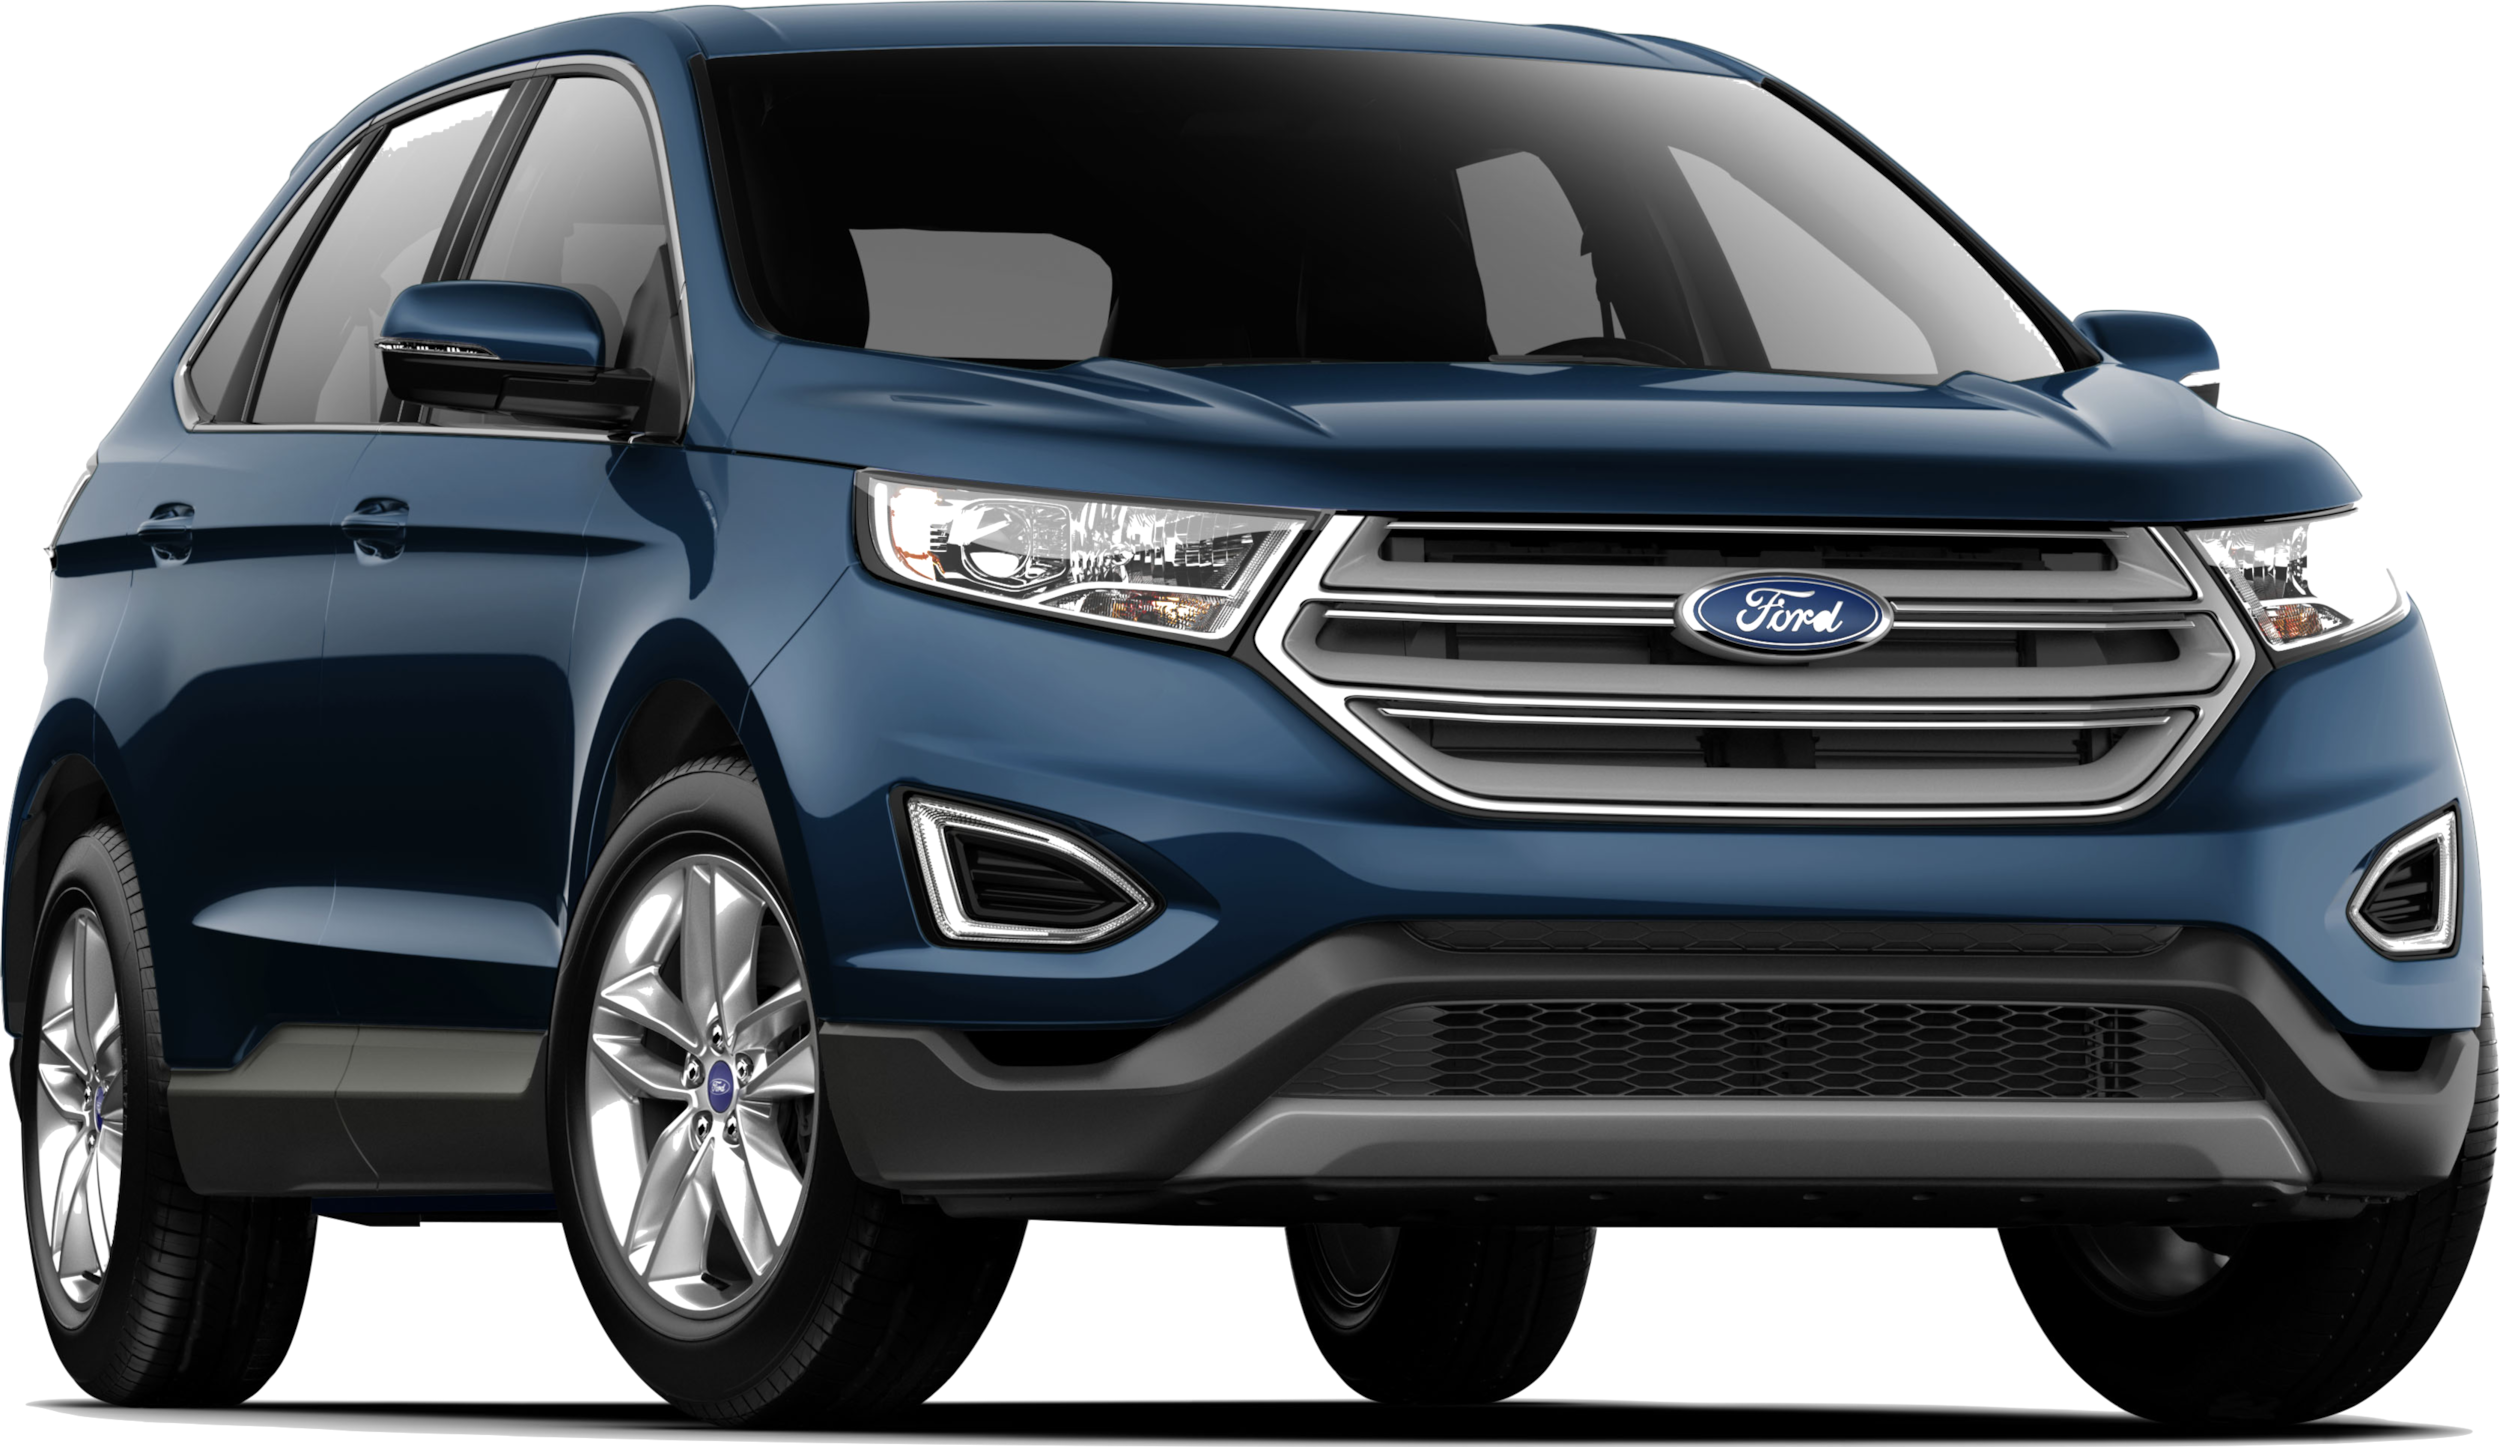 2019 Ford Edge Lease Deal 319/mo for 36 Months Zeigler Ford of